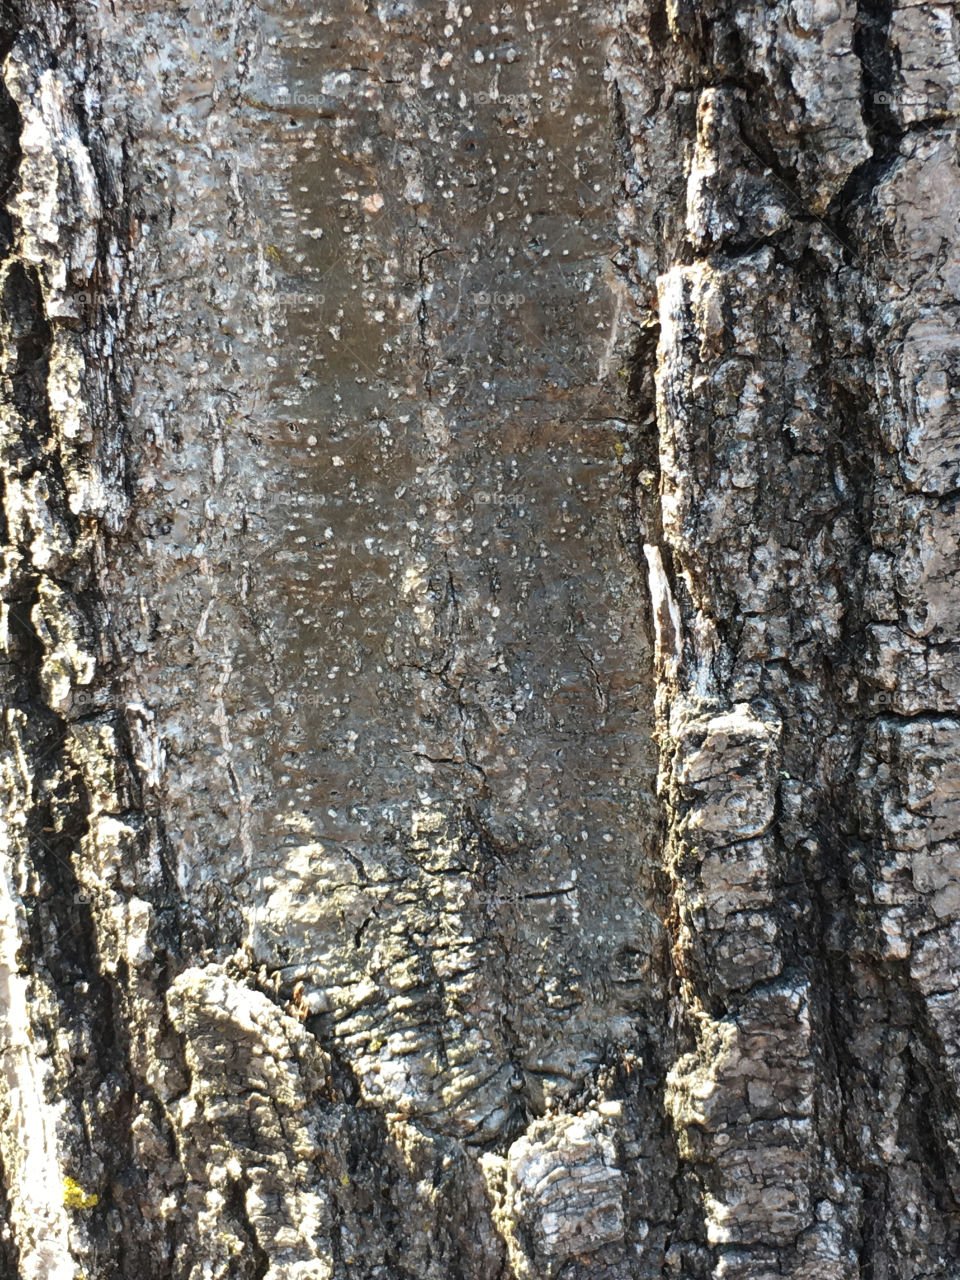 Closeup of the bark and wood surface of a tree trunk